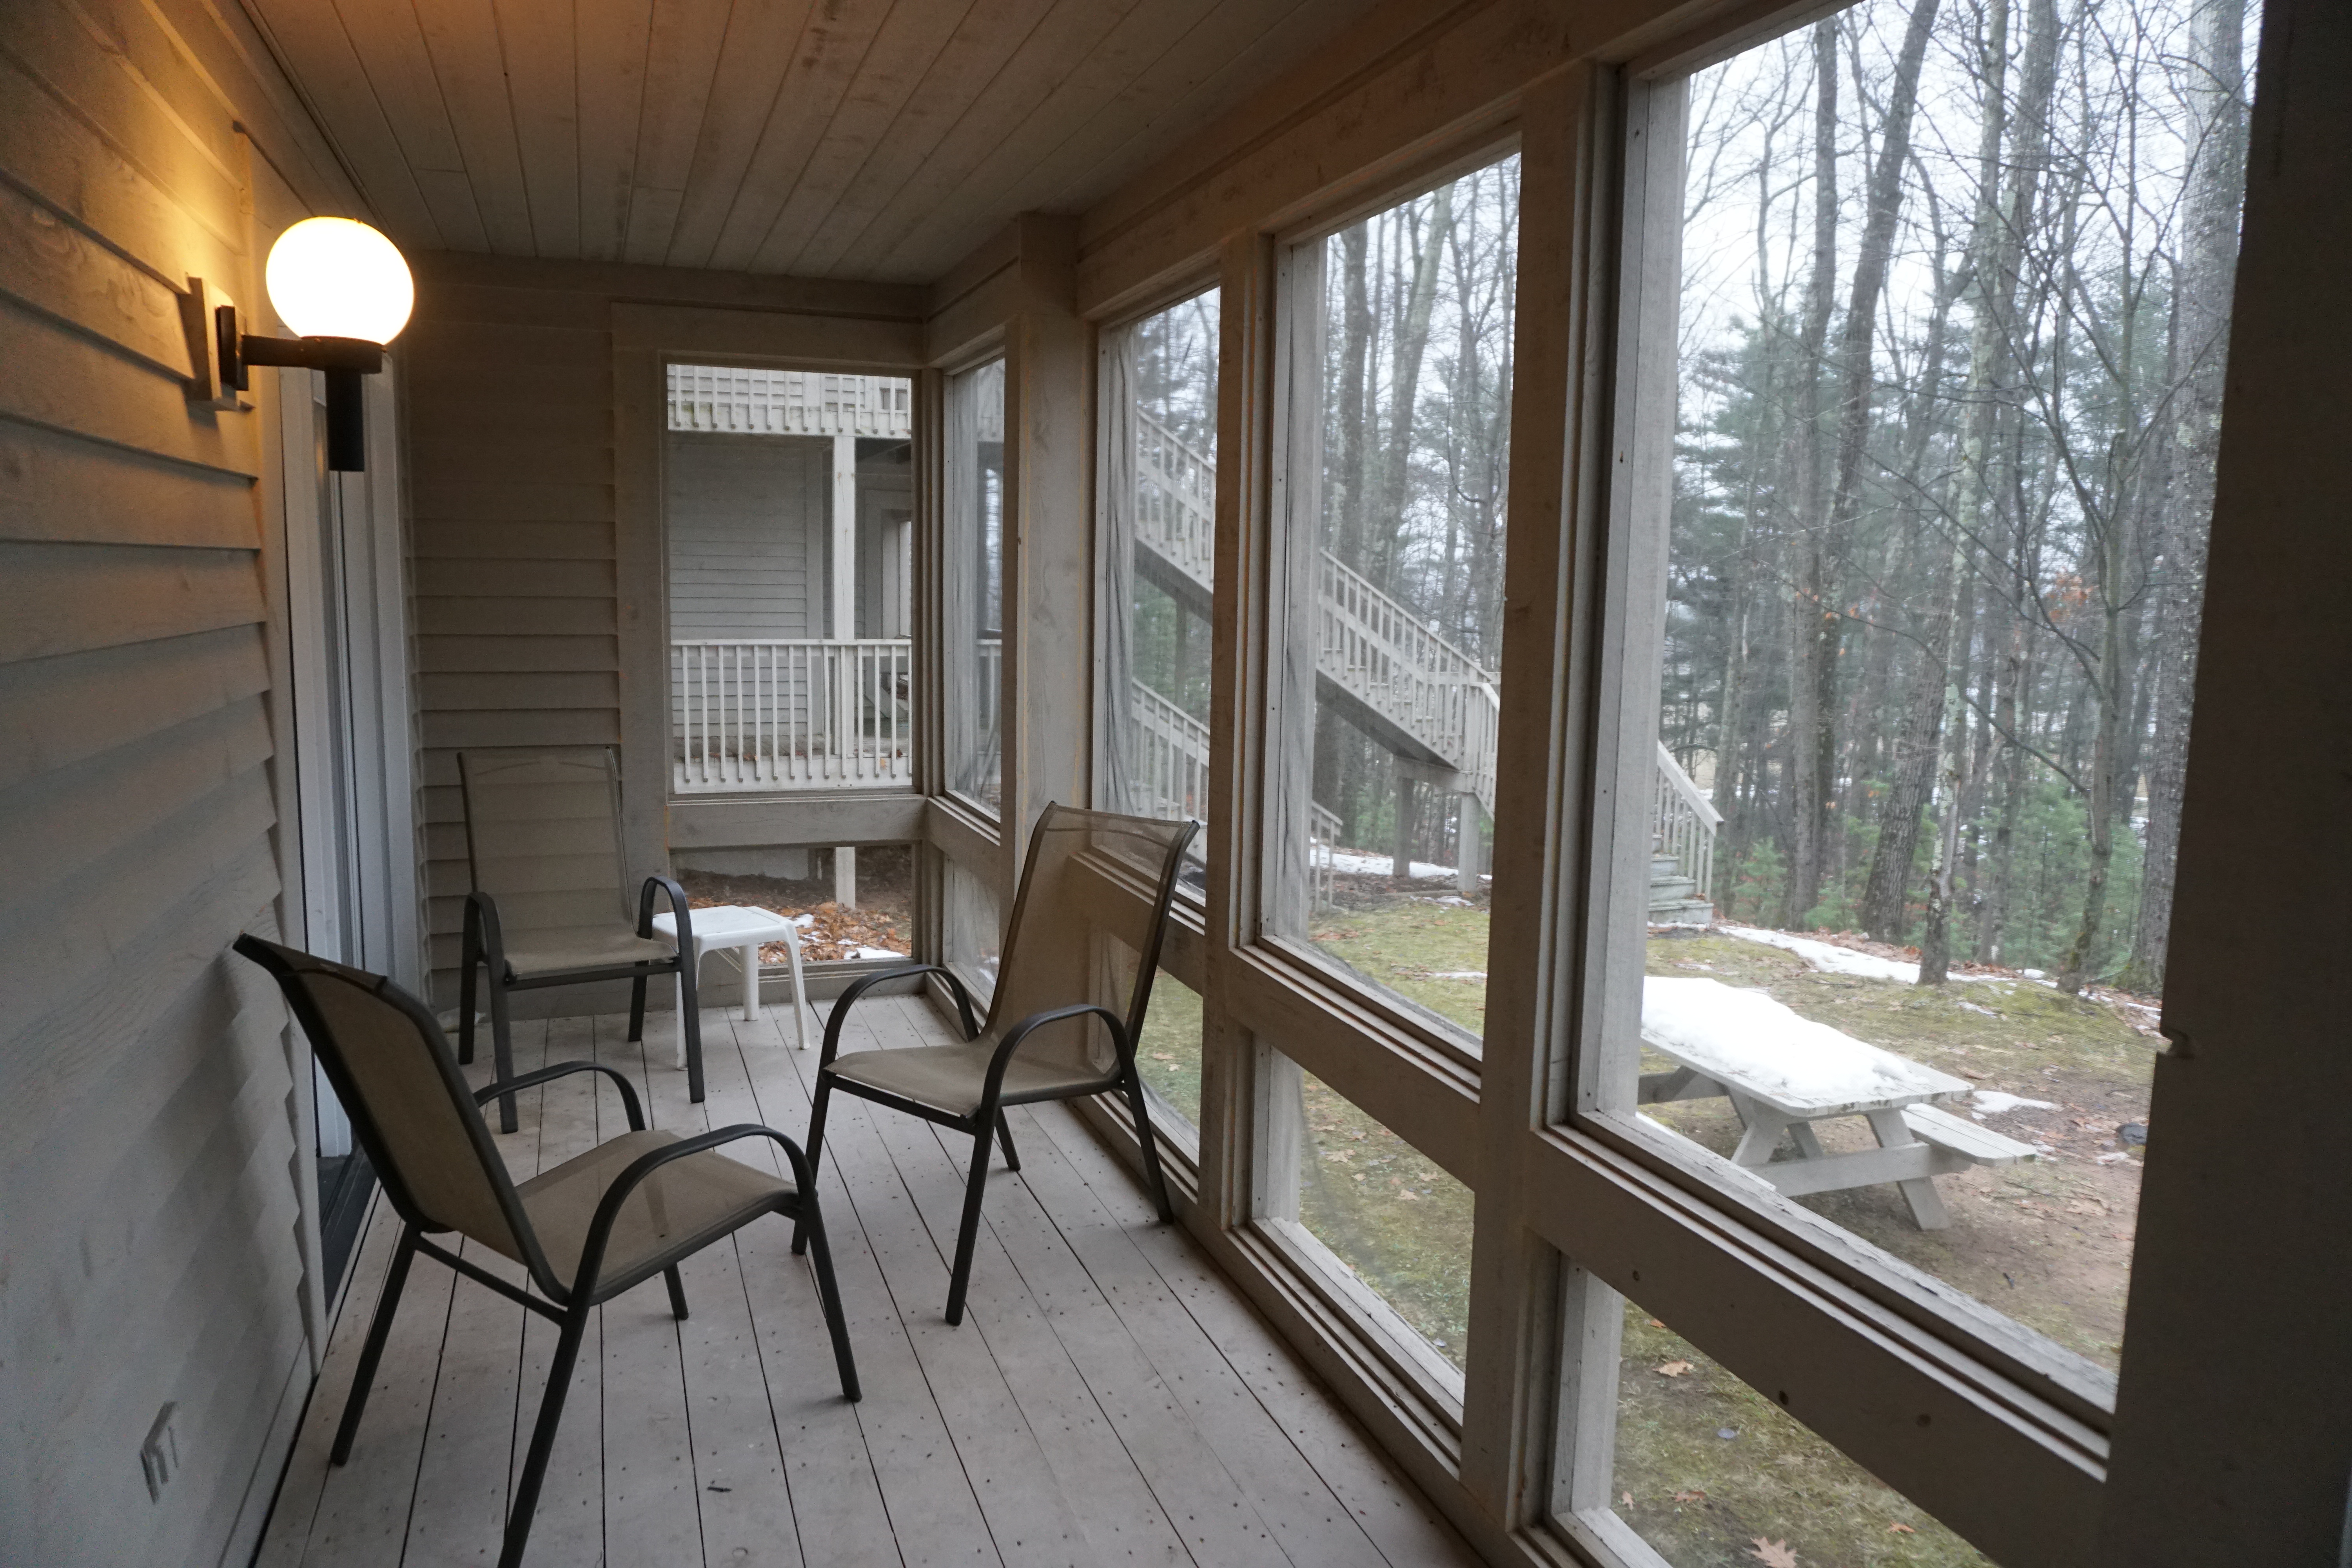 Telemark Resort porch with chairs